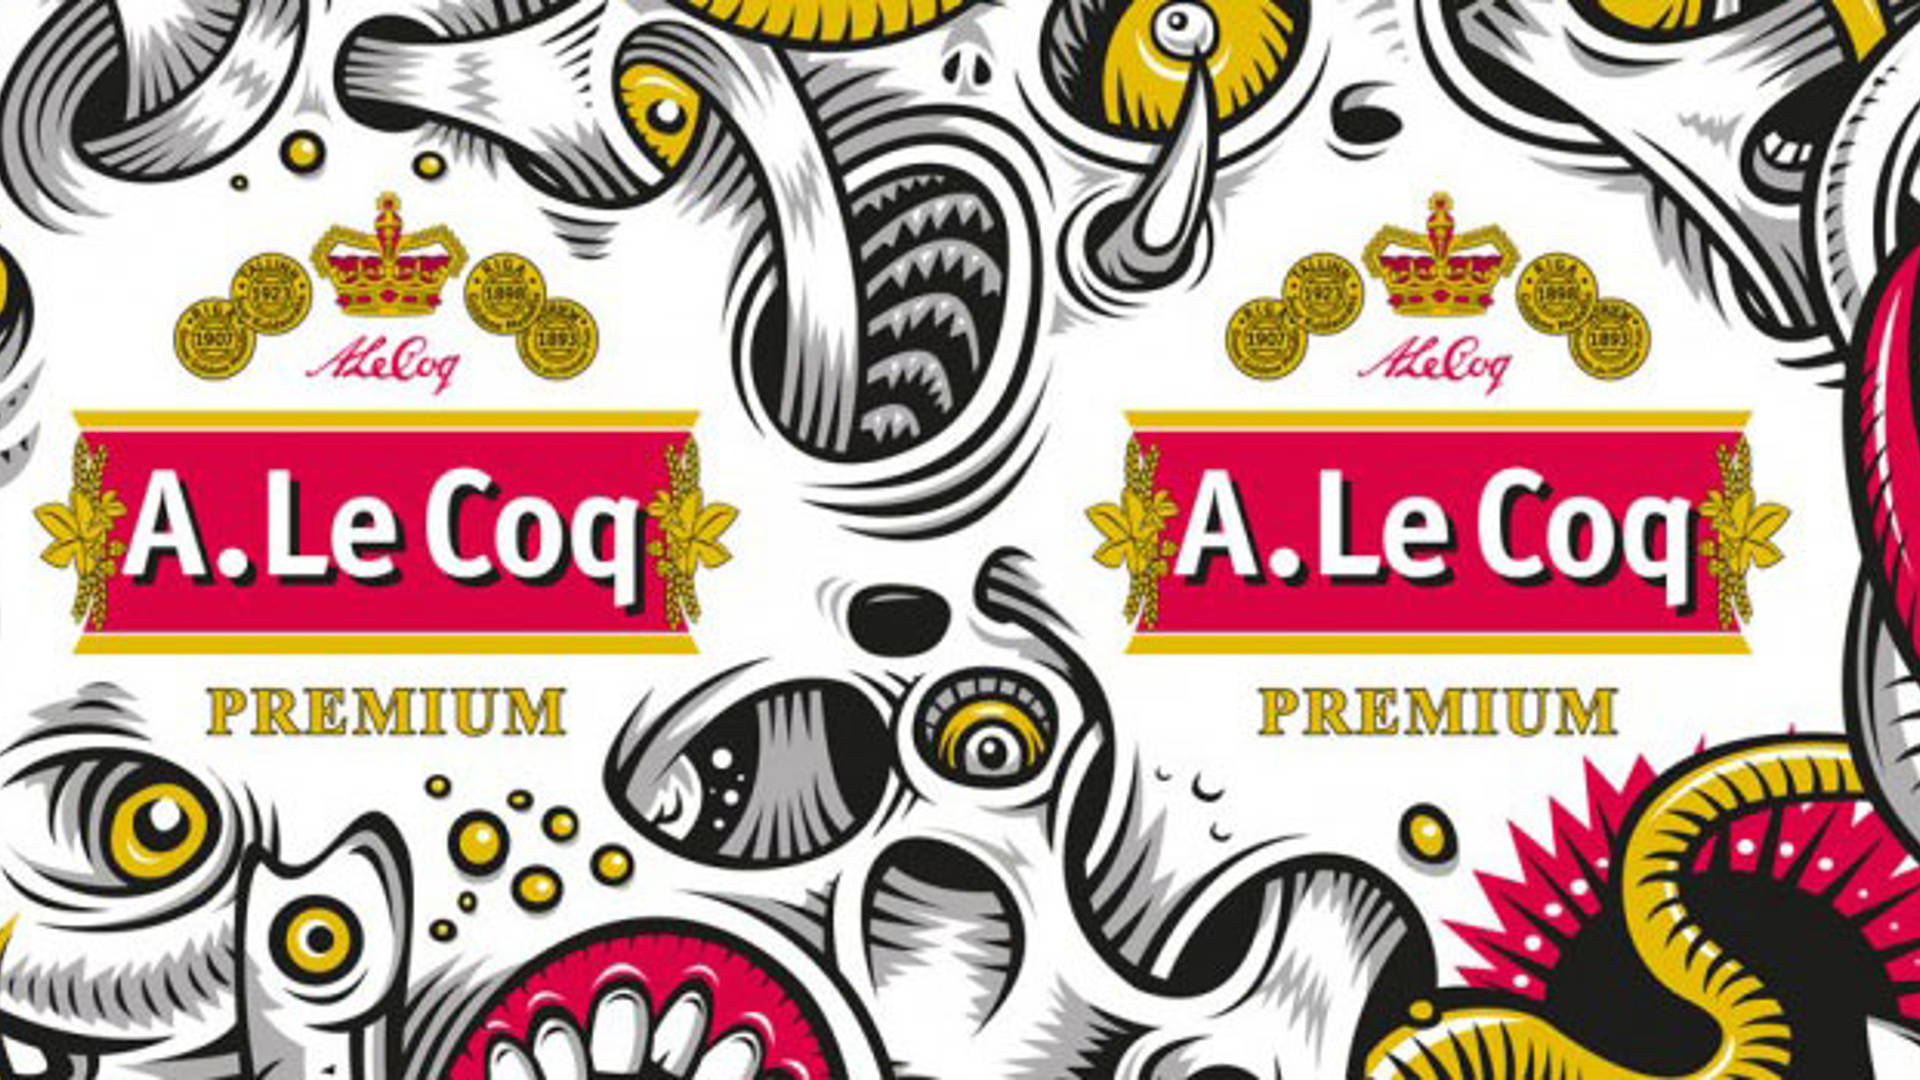 Featured image for A. Le Coq Estonian Brewery